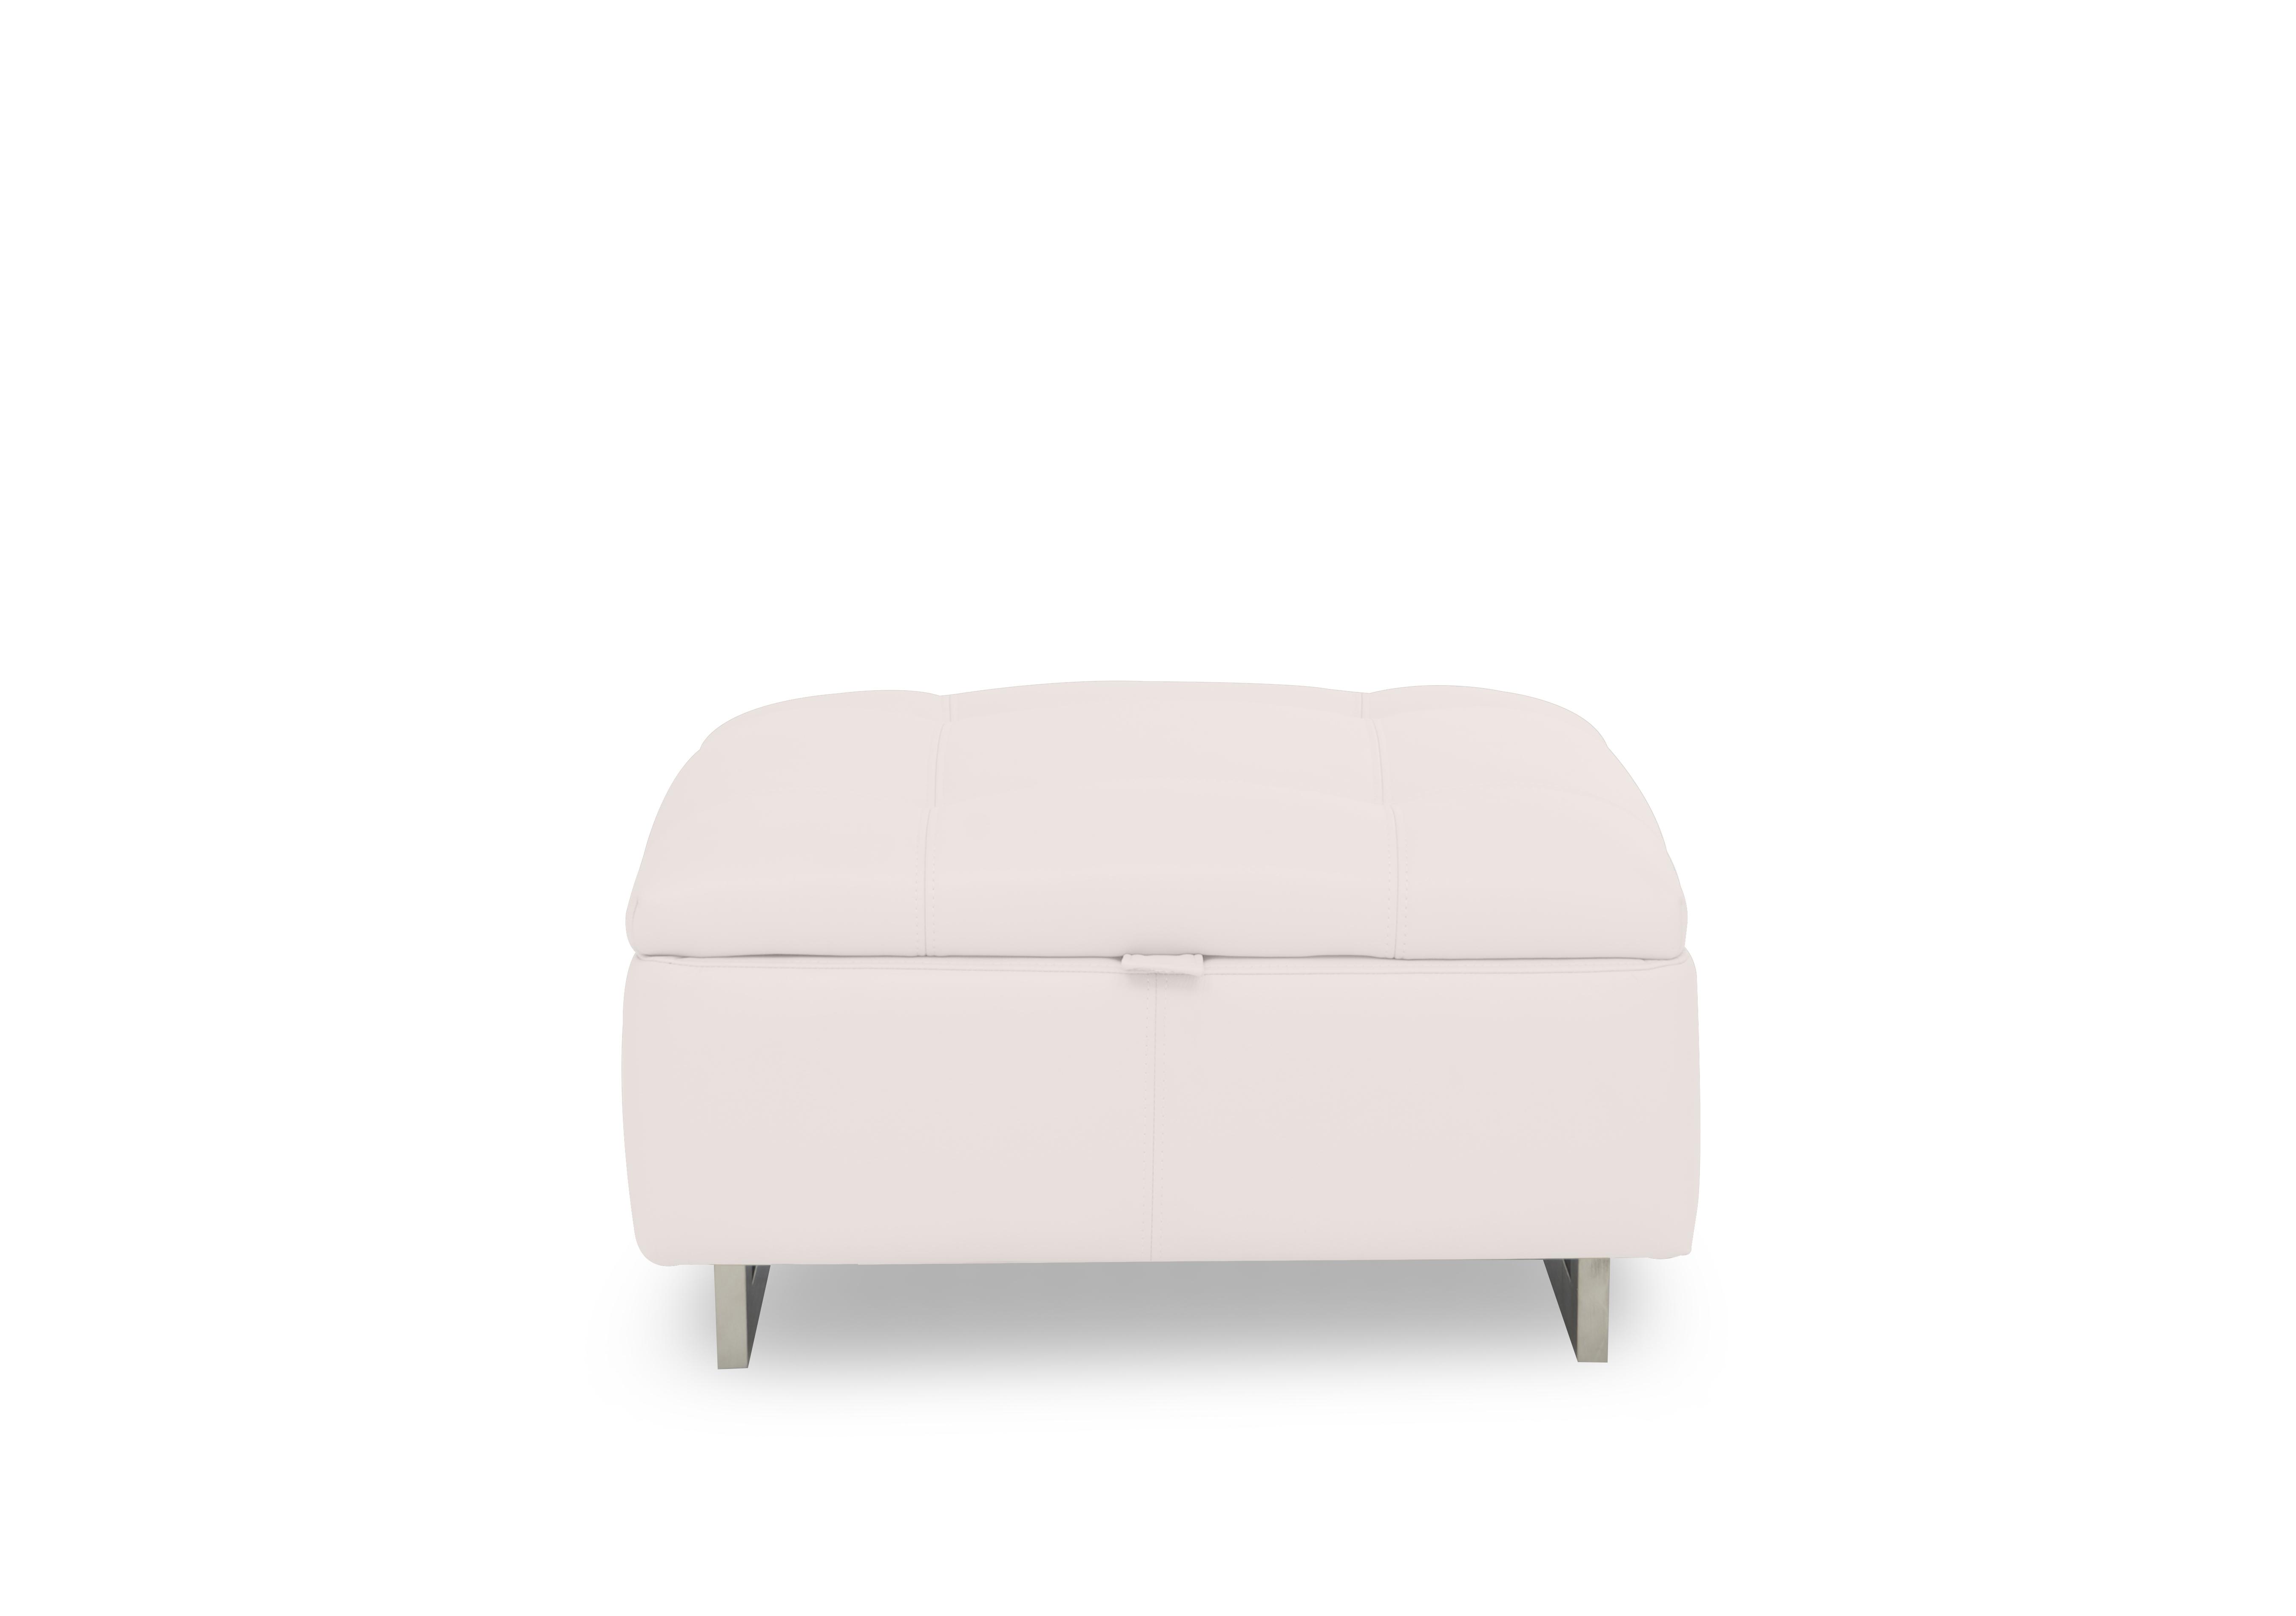 Moet Large Leather Storage Footstool in Cat-40/13 Cotton on Furniture Village